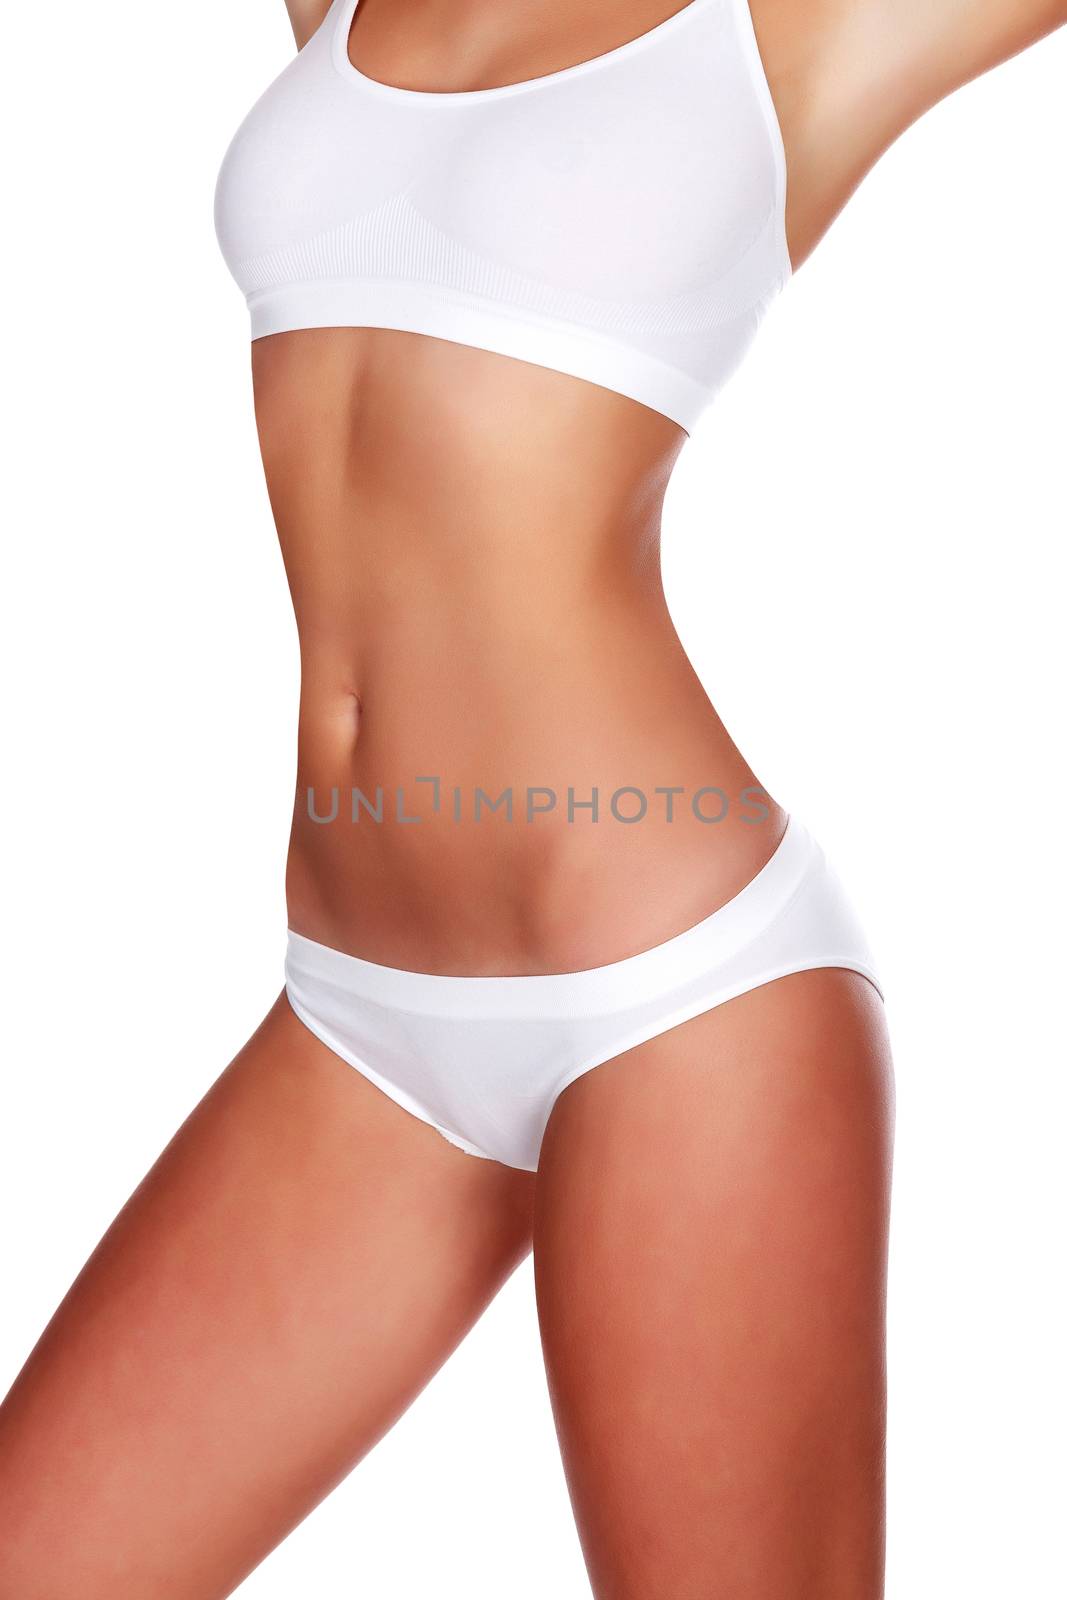 Sexy woman in white underwear on white background, isolated